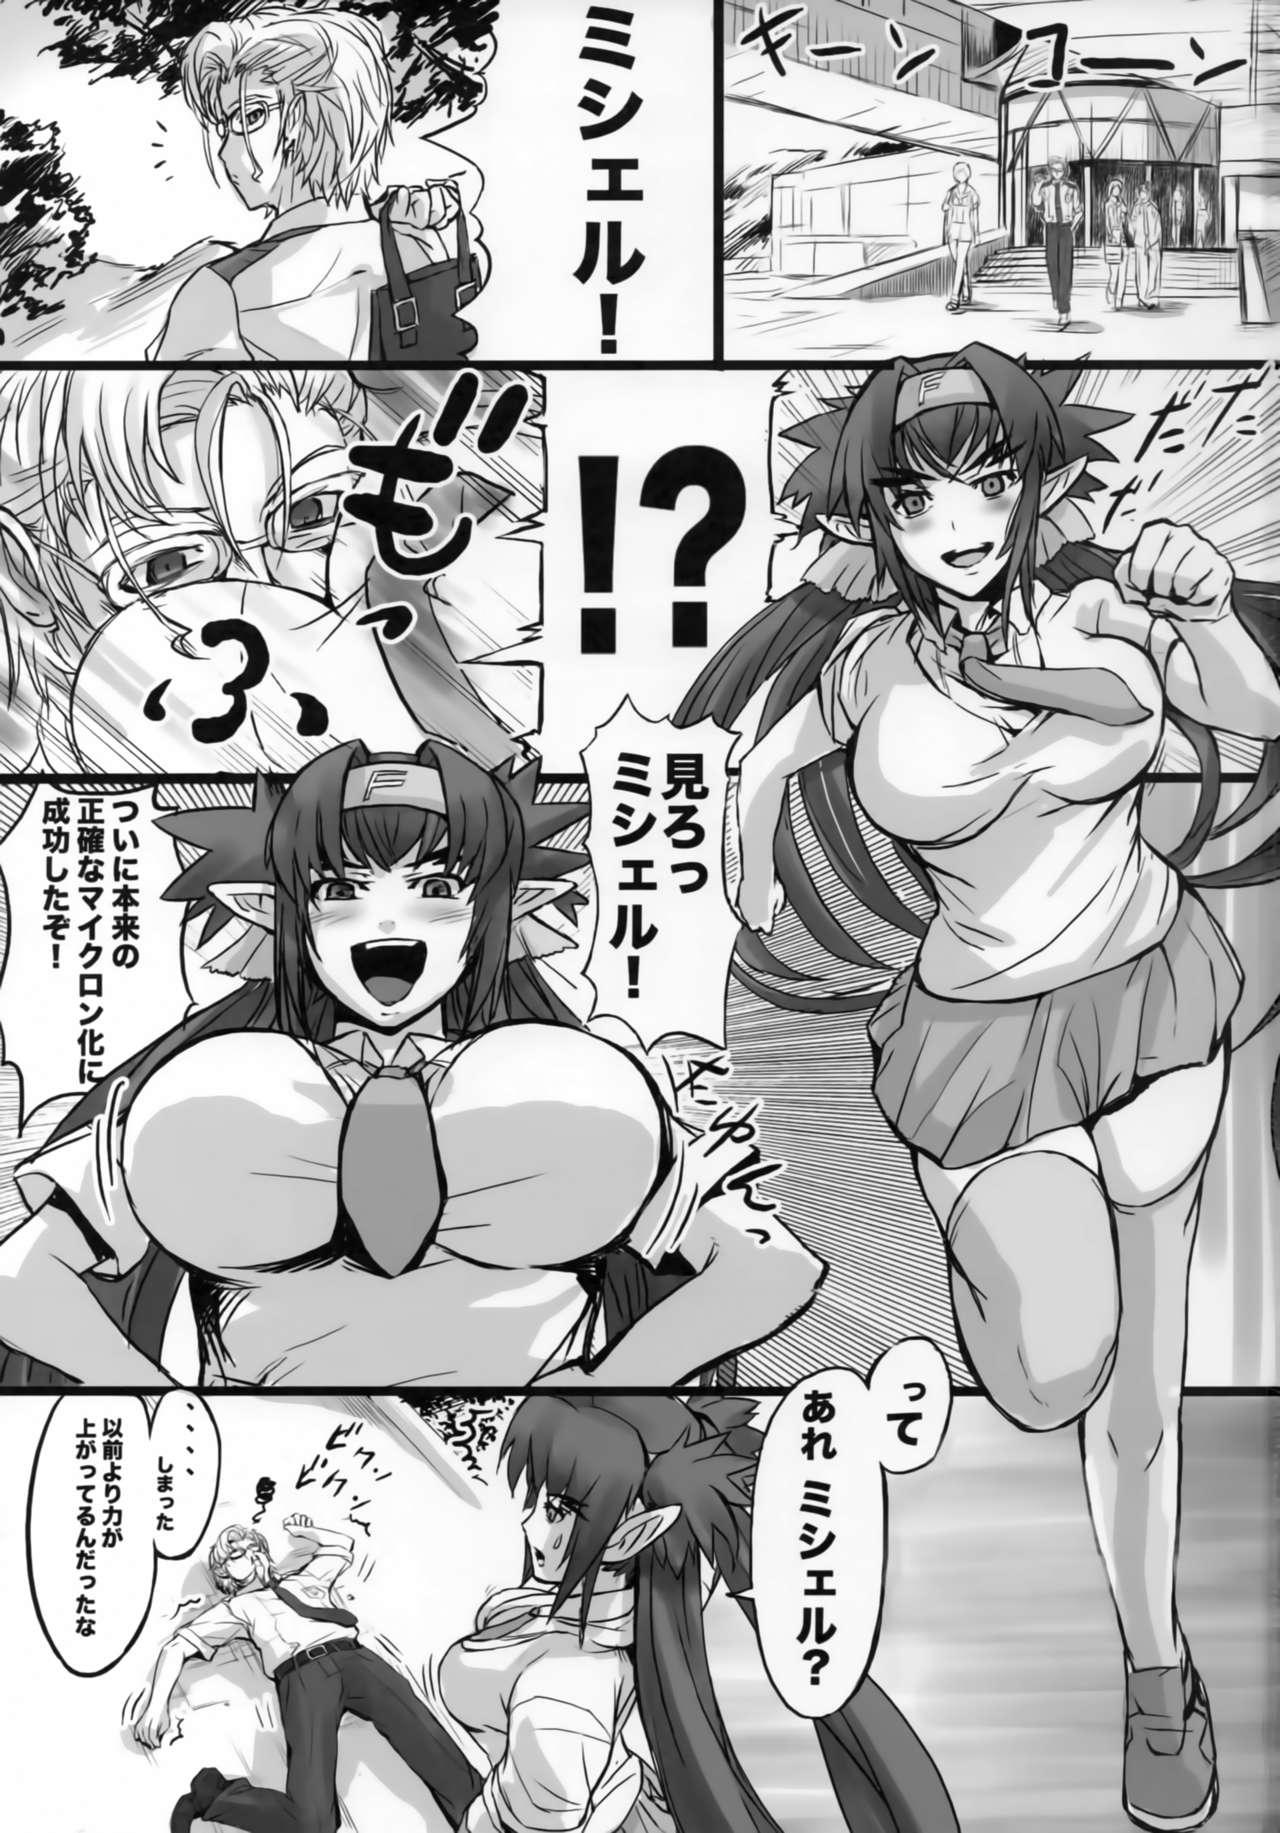 Virtual Sexcross Frontier - Macross frontier Breasts - Page 2